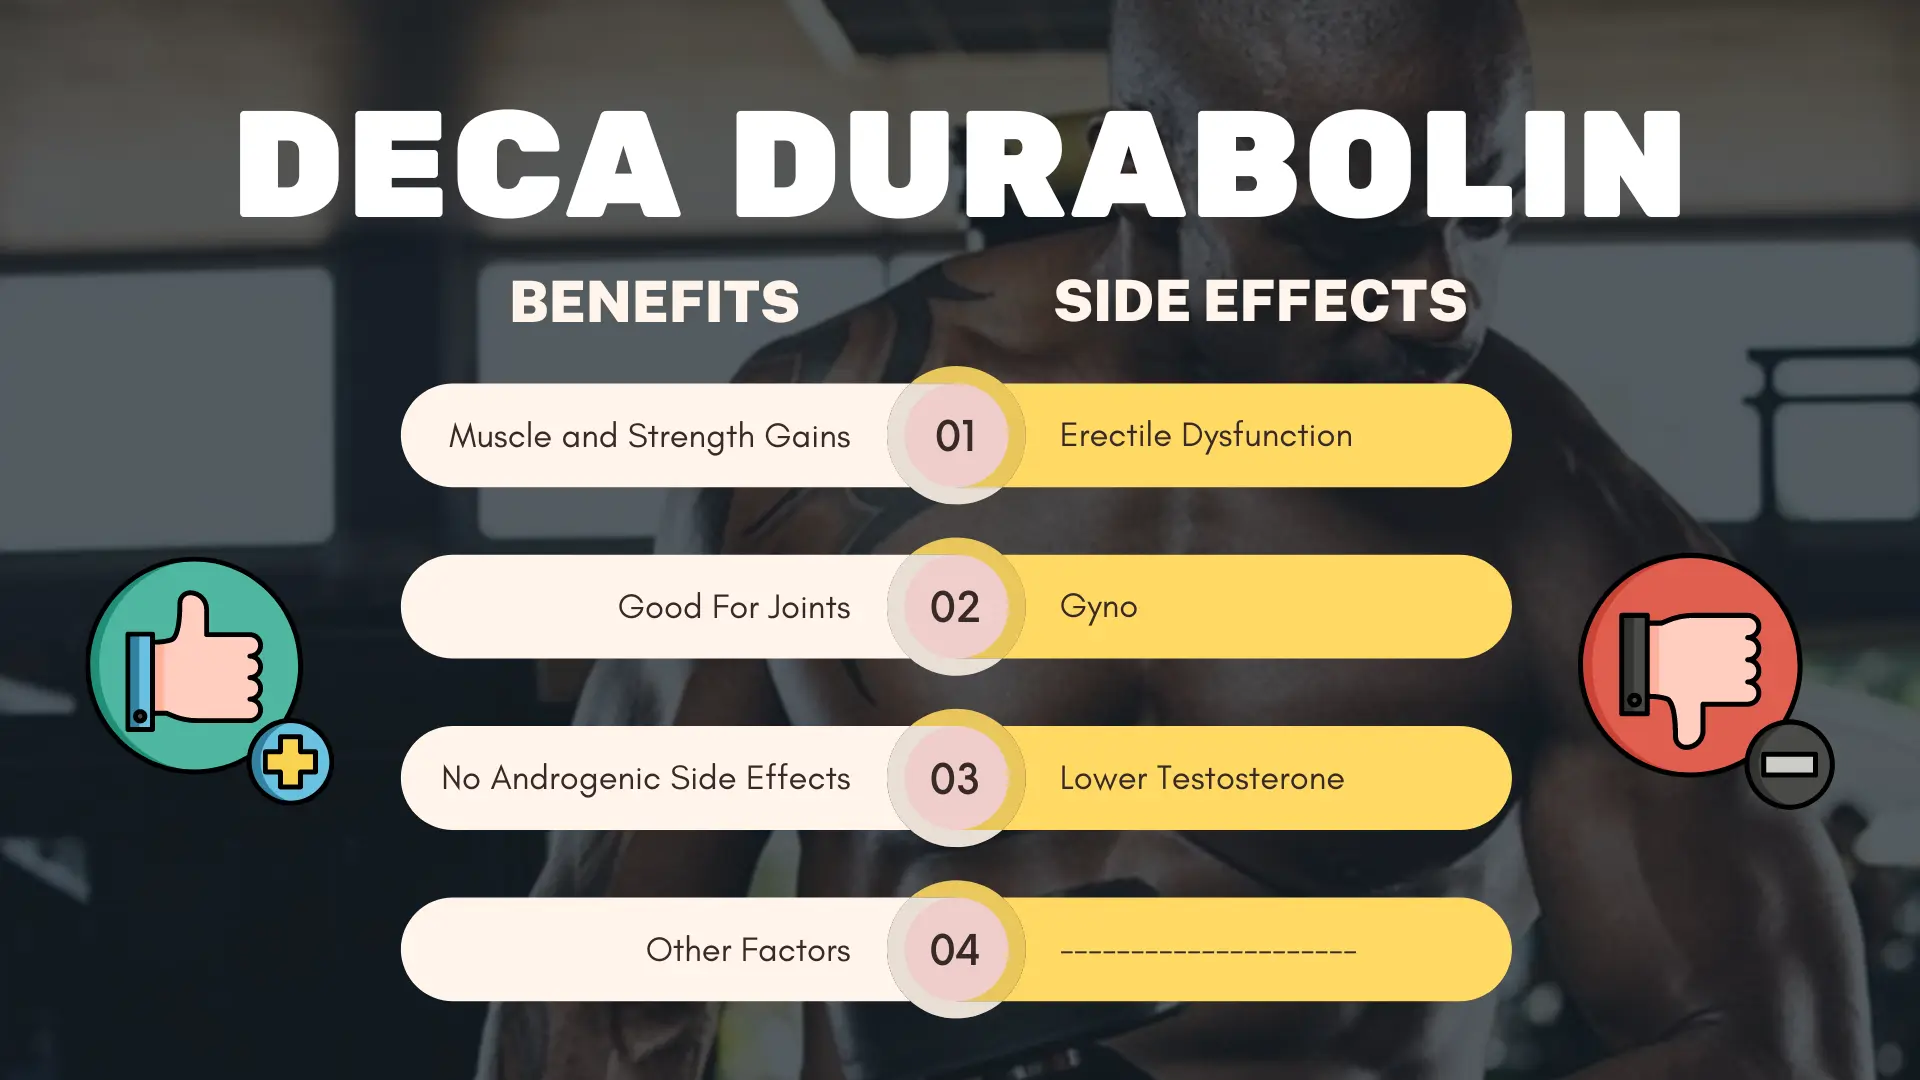 Deca Durabolin benefits and side effects